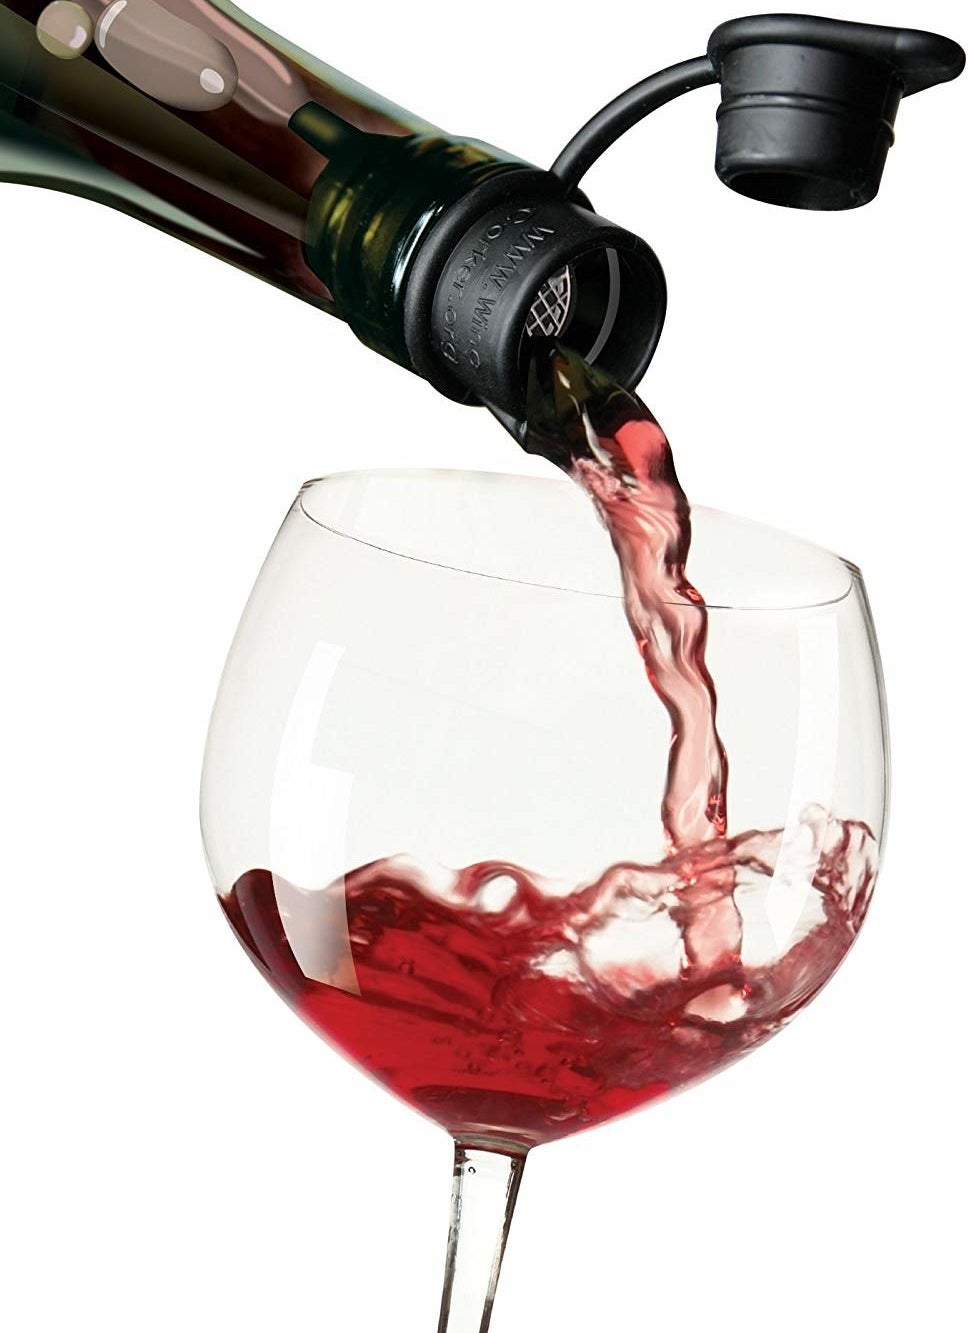 Wine being poured from a bottle plugged with the gadget being used as a filter